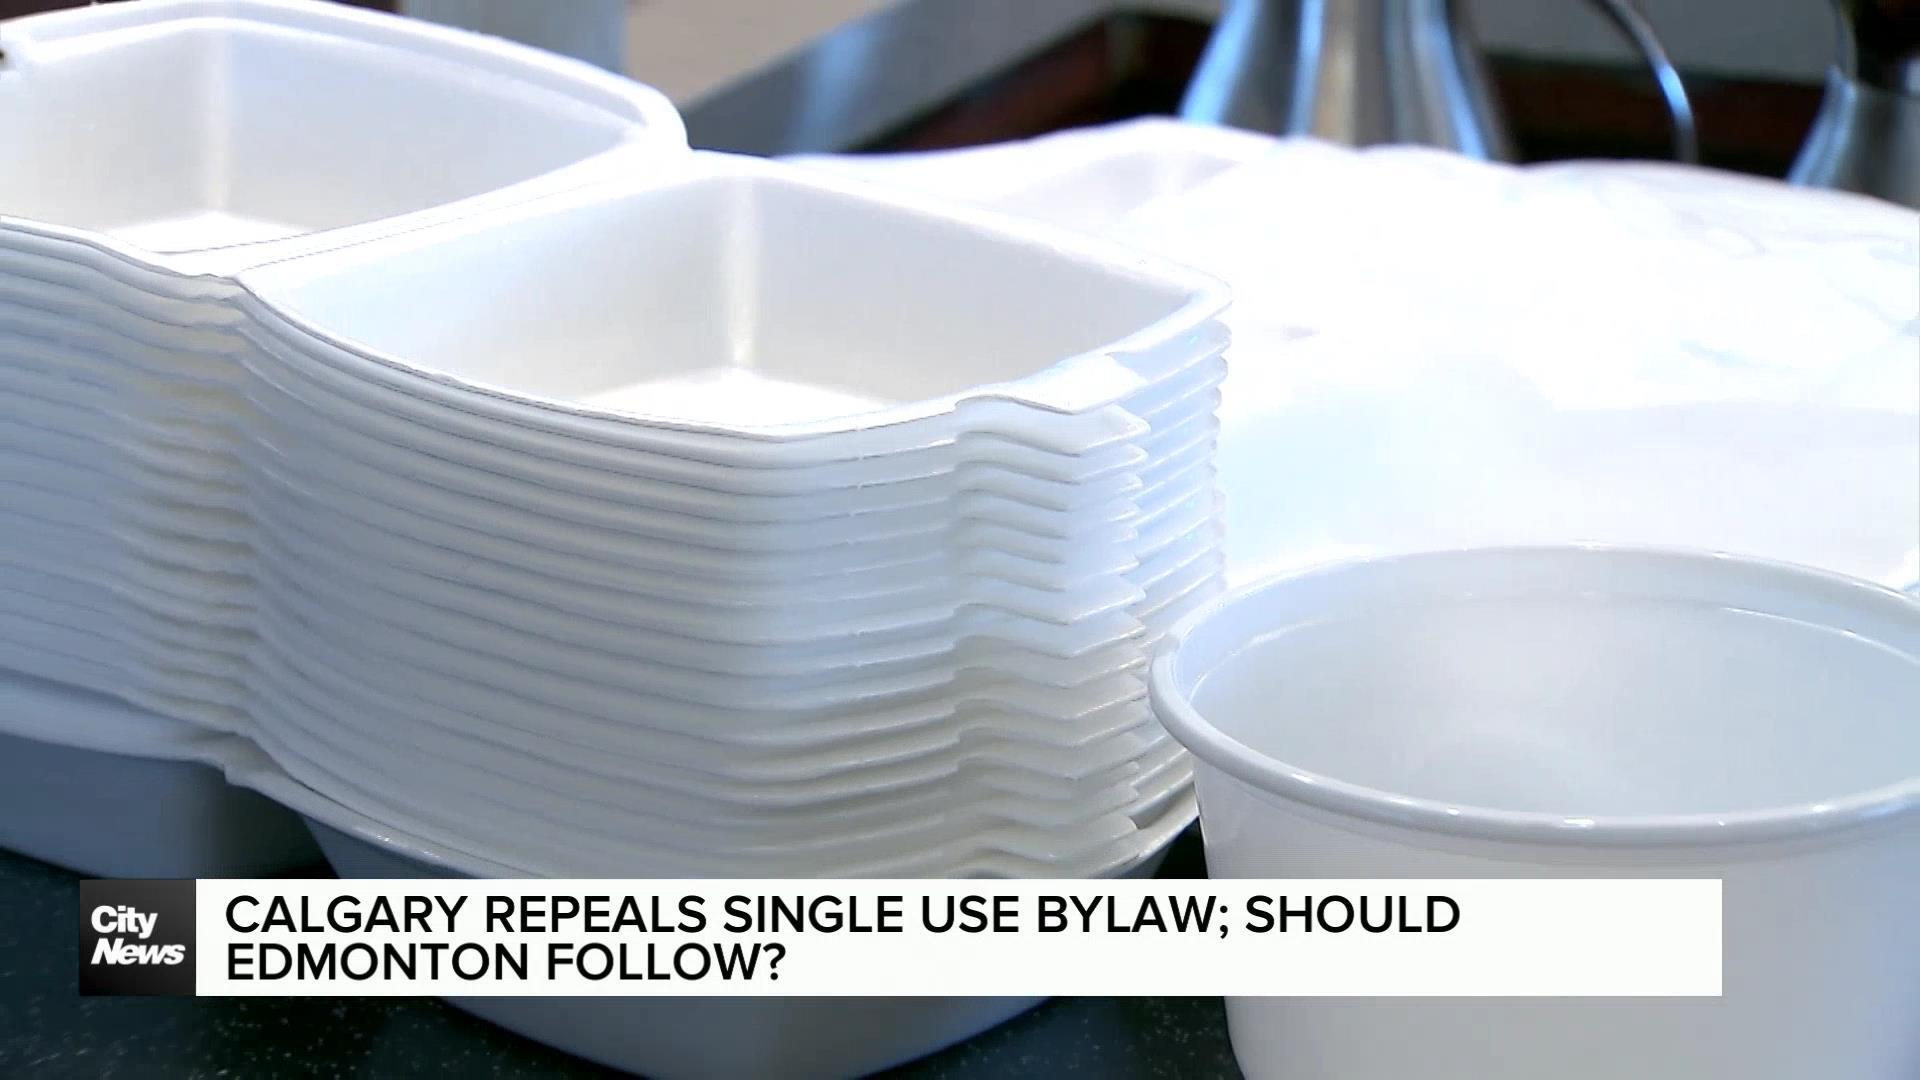 Should Edmonton look at repealing single-use bylaw?